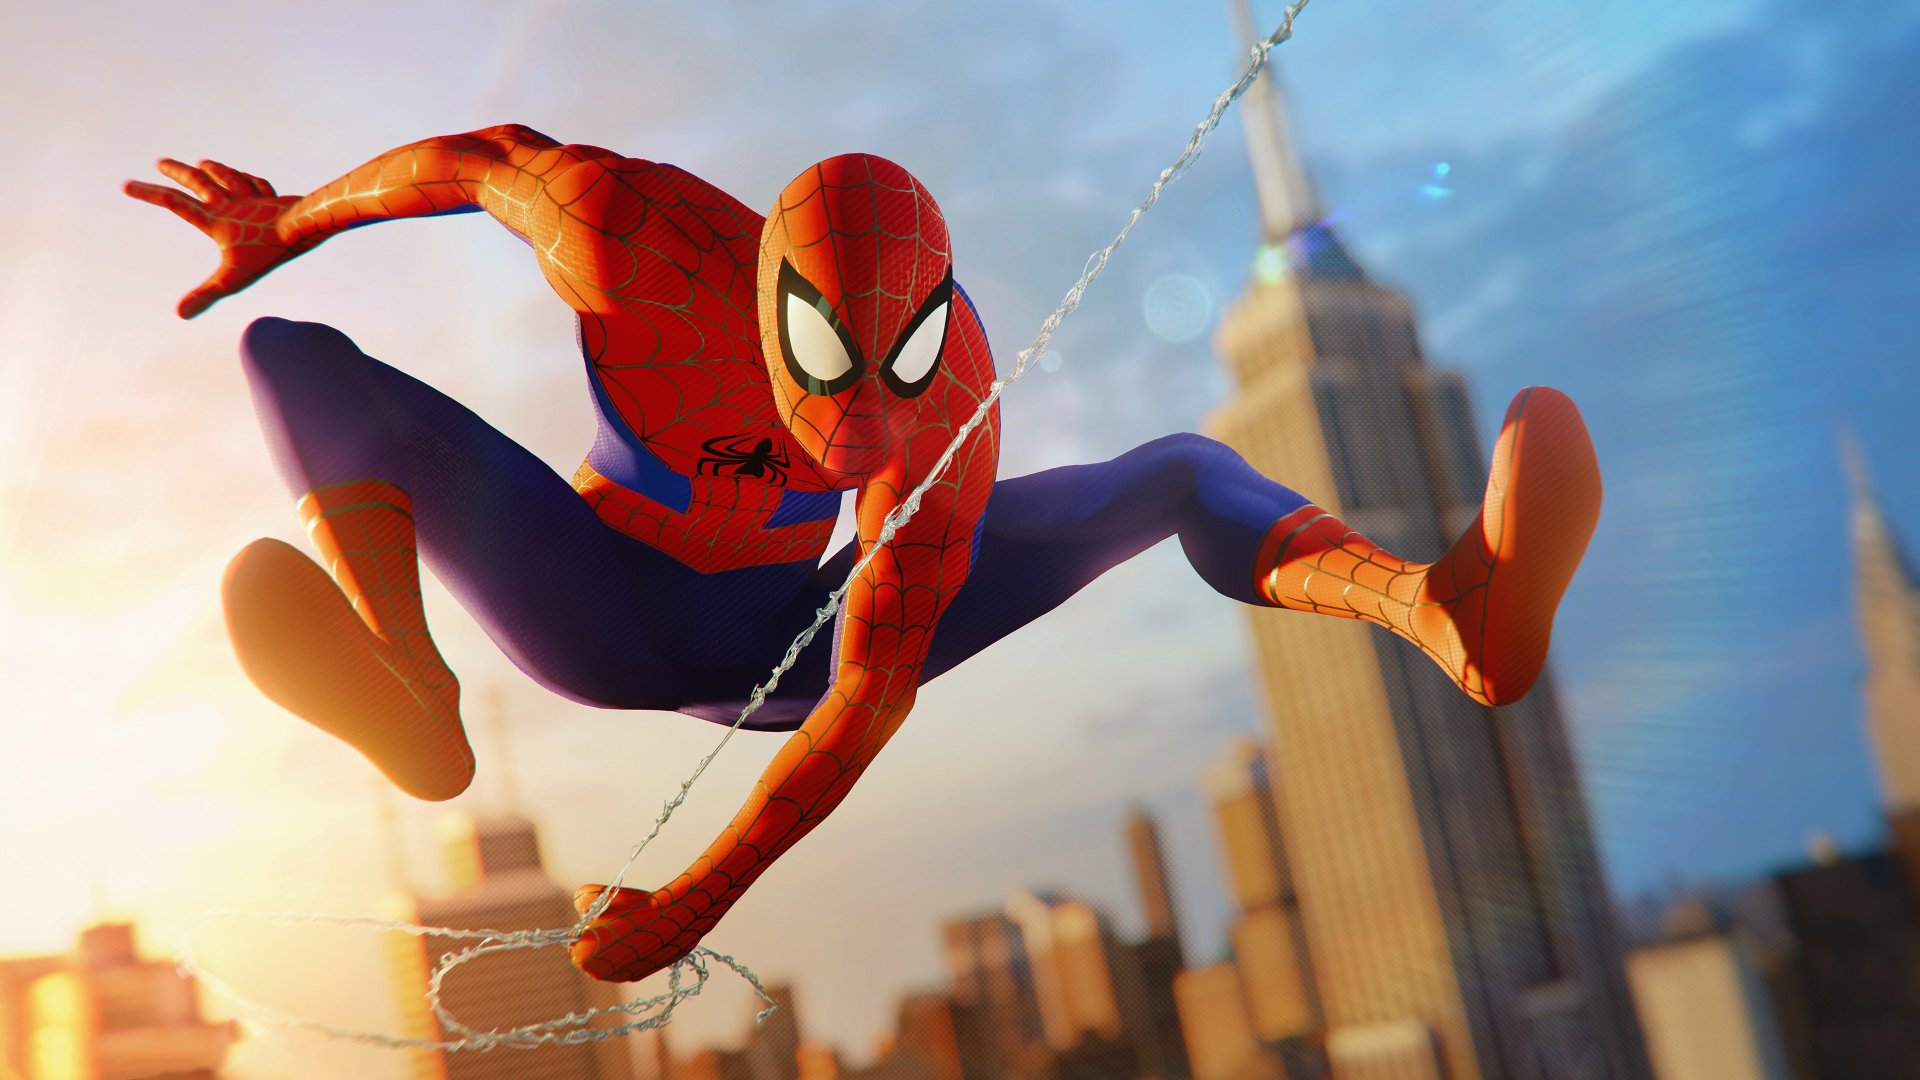 Spider-Man (PS4) in action, vibrant and dynamic desktop wallpaper featuring the video game character swinging through the cityscape.